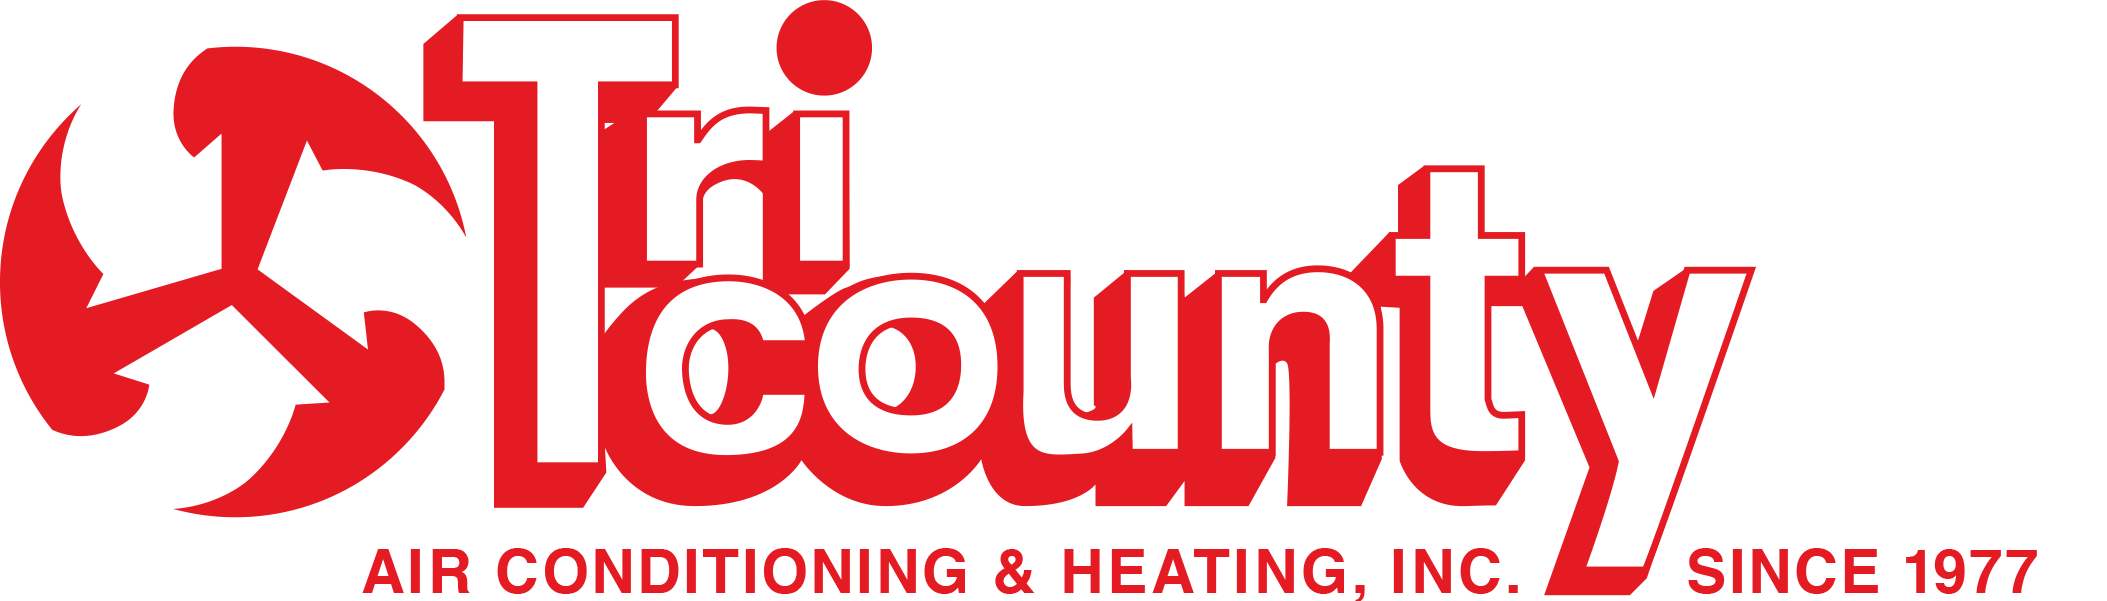 Tri County Air Conditioning-Heating, Inc.